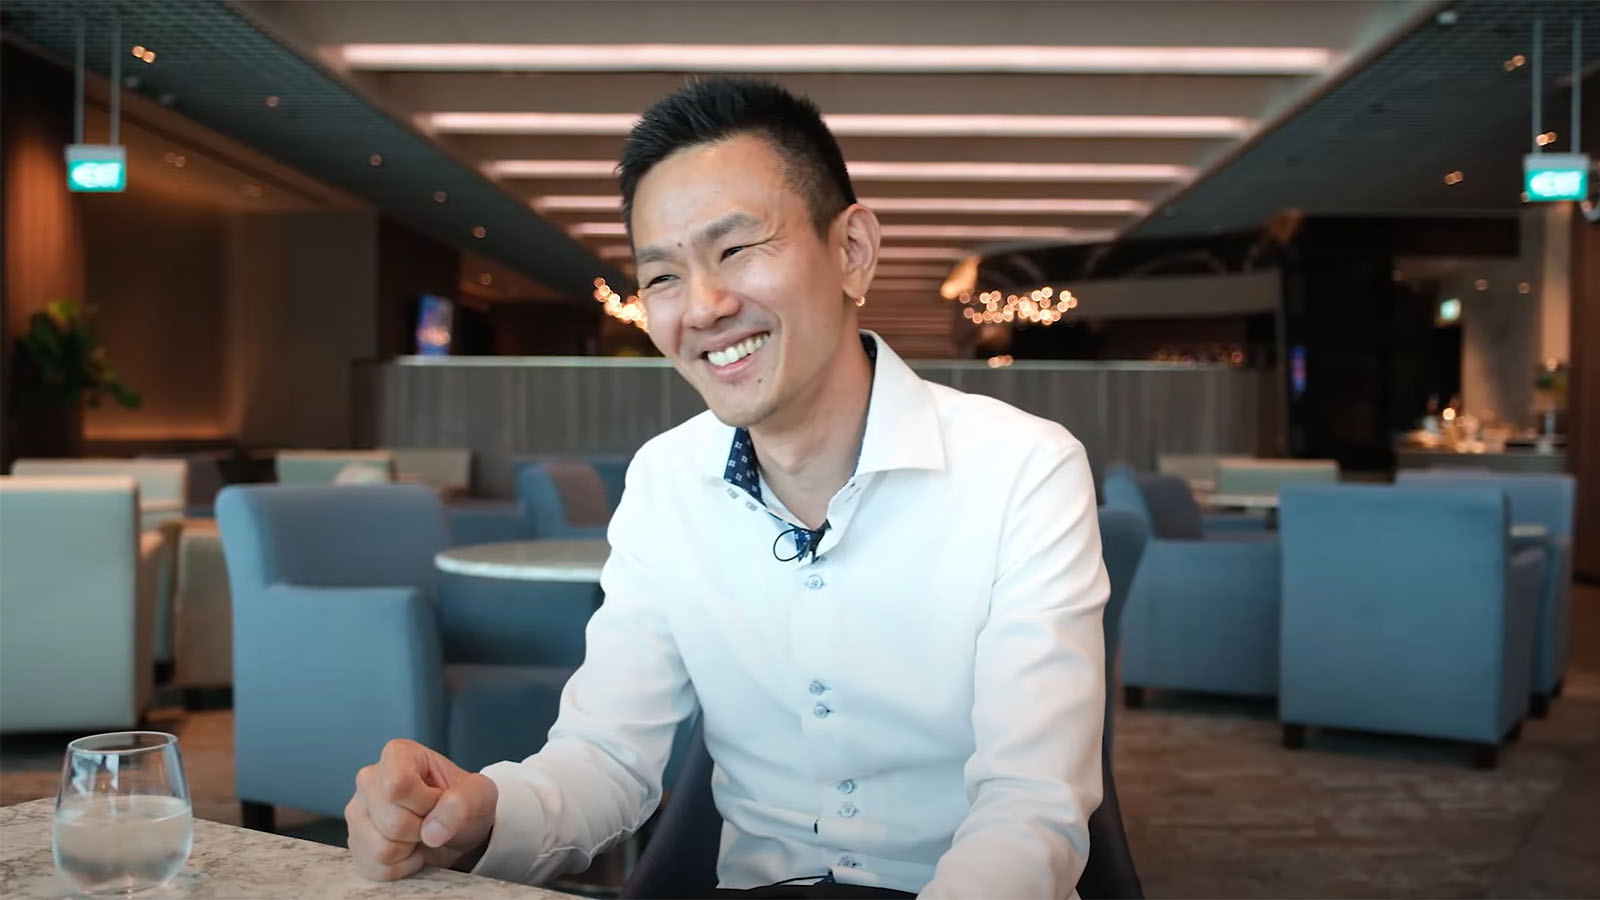 Five questions with Philip Lim, PPS Manager at Singapore Airlines ...